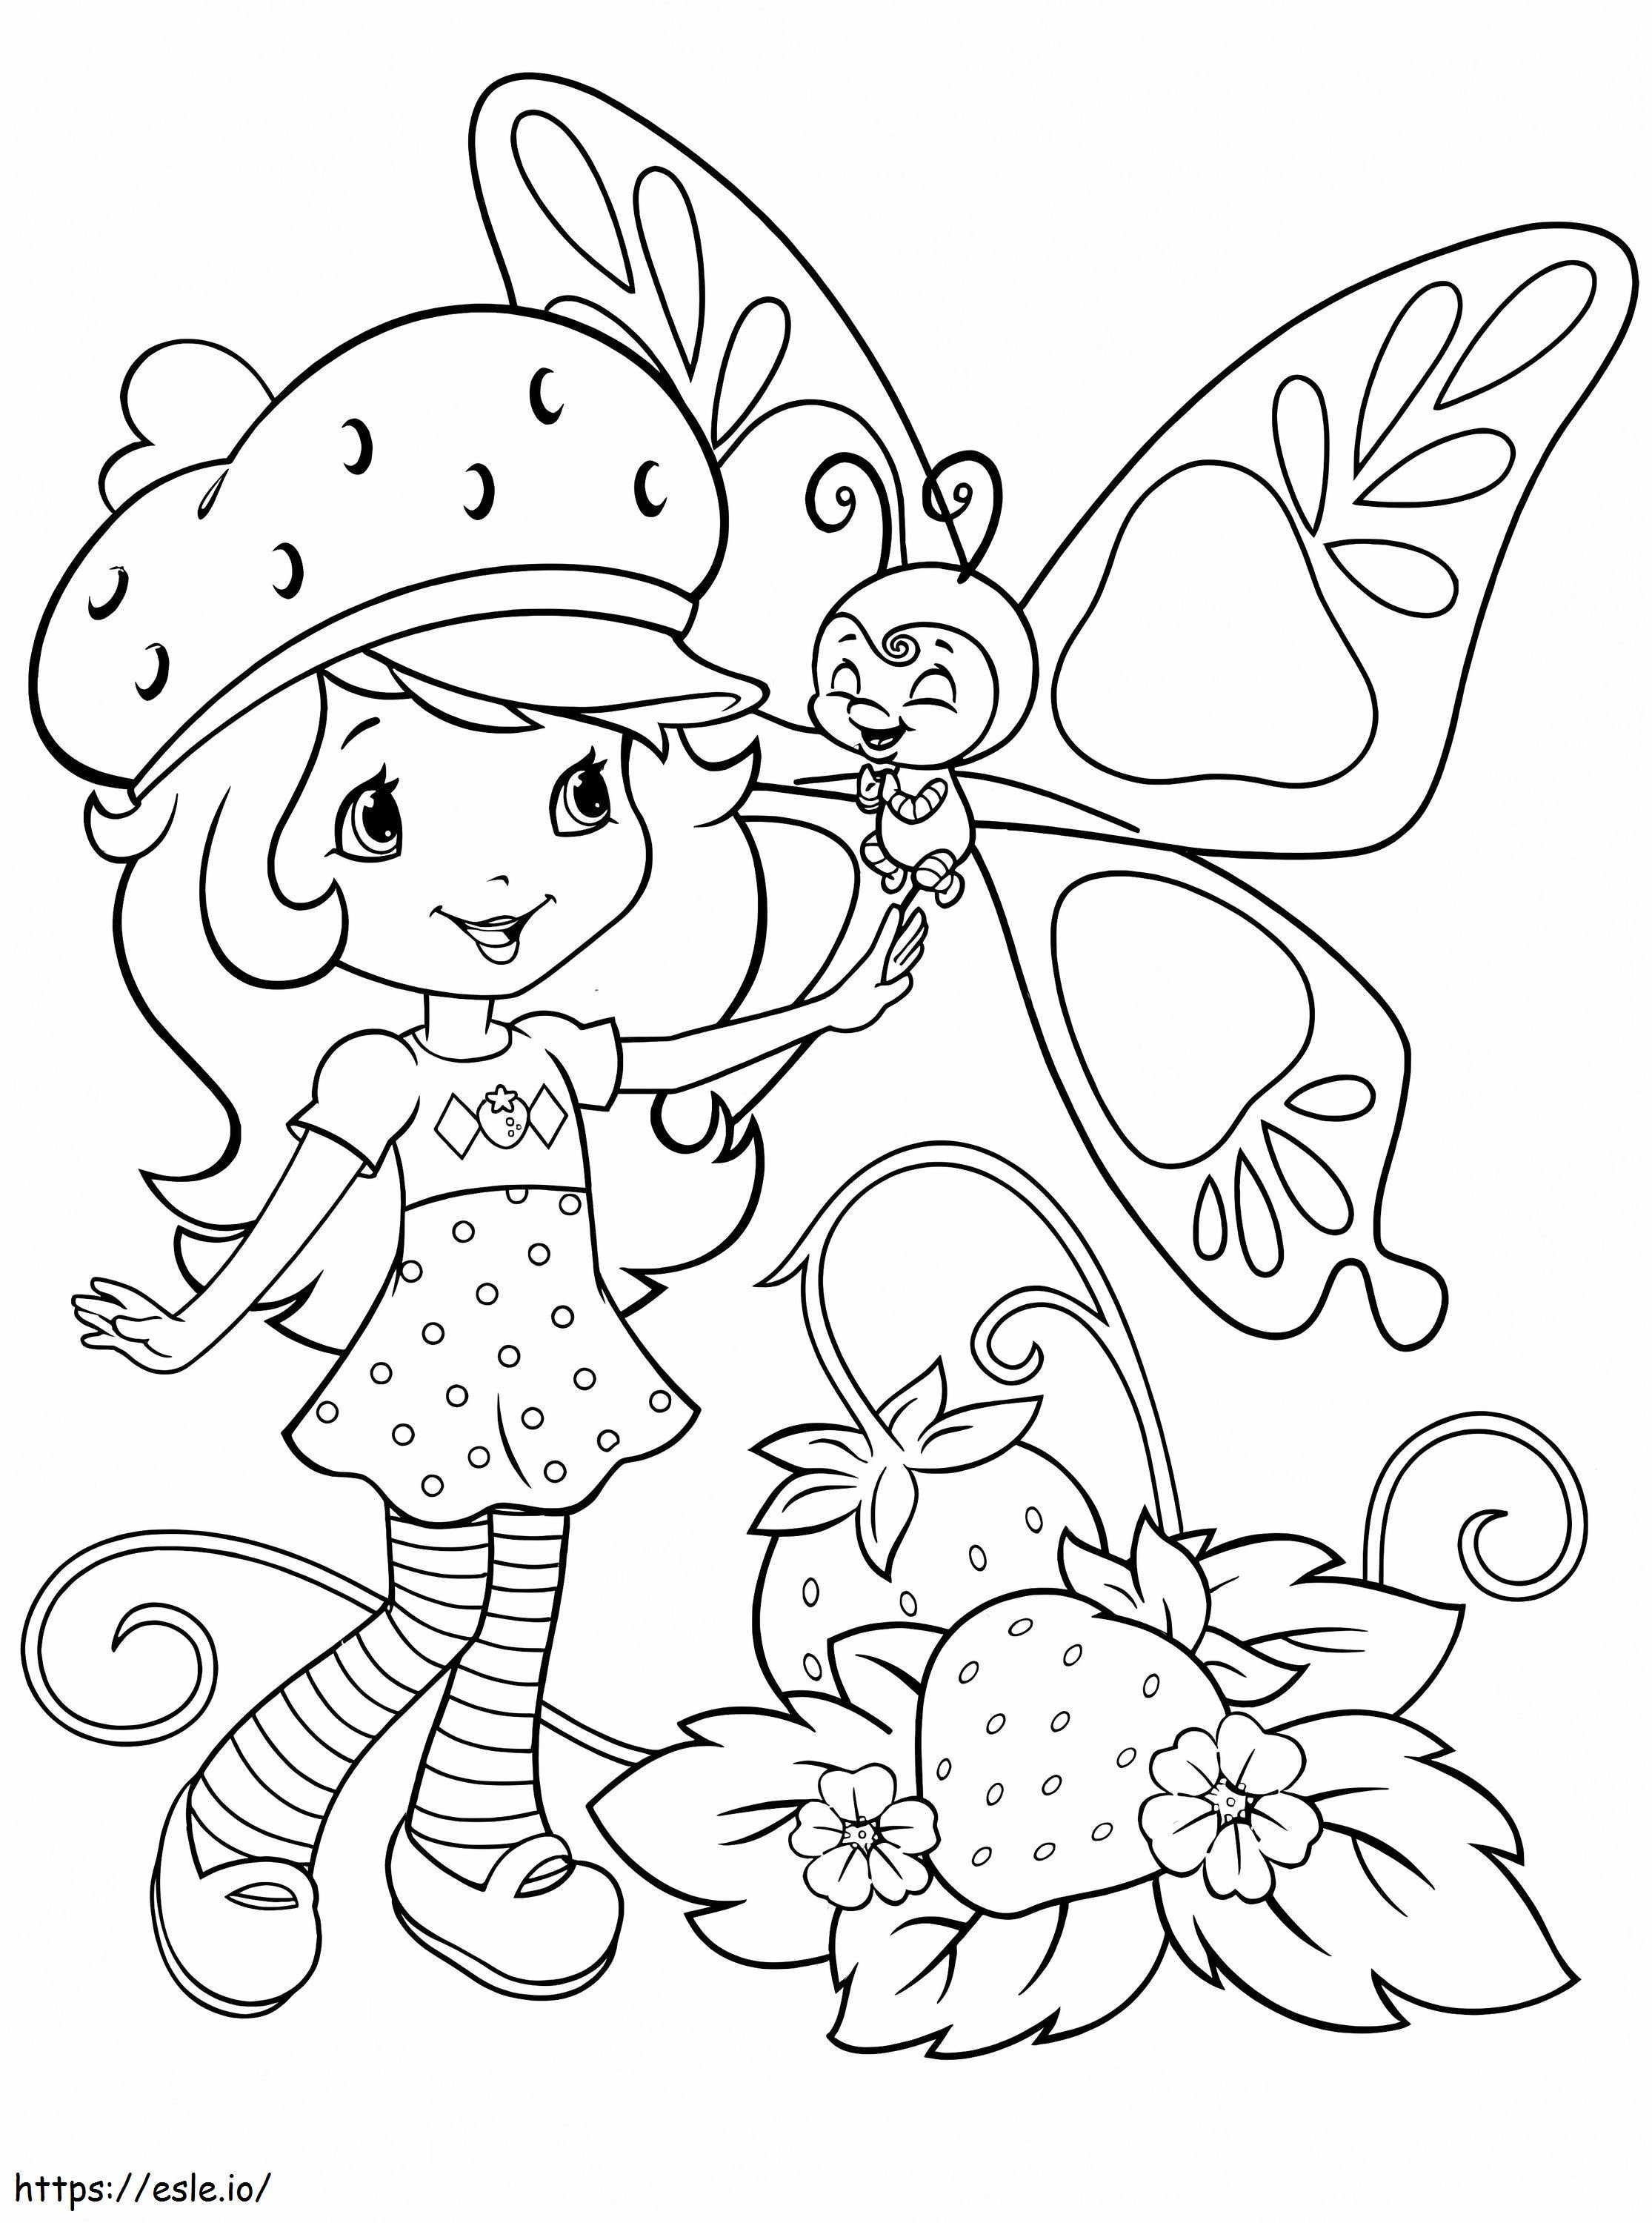 Strawberry Shortcake And Butterfly coloring page